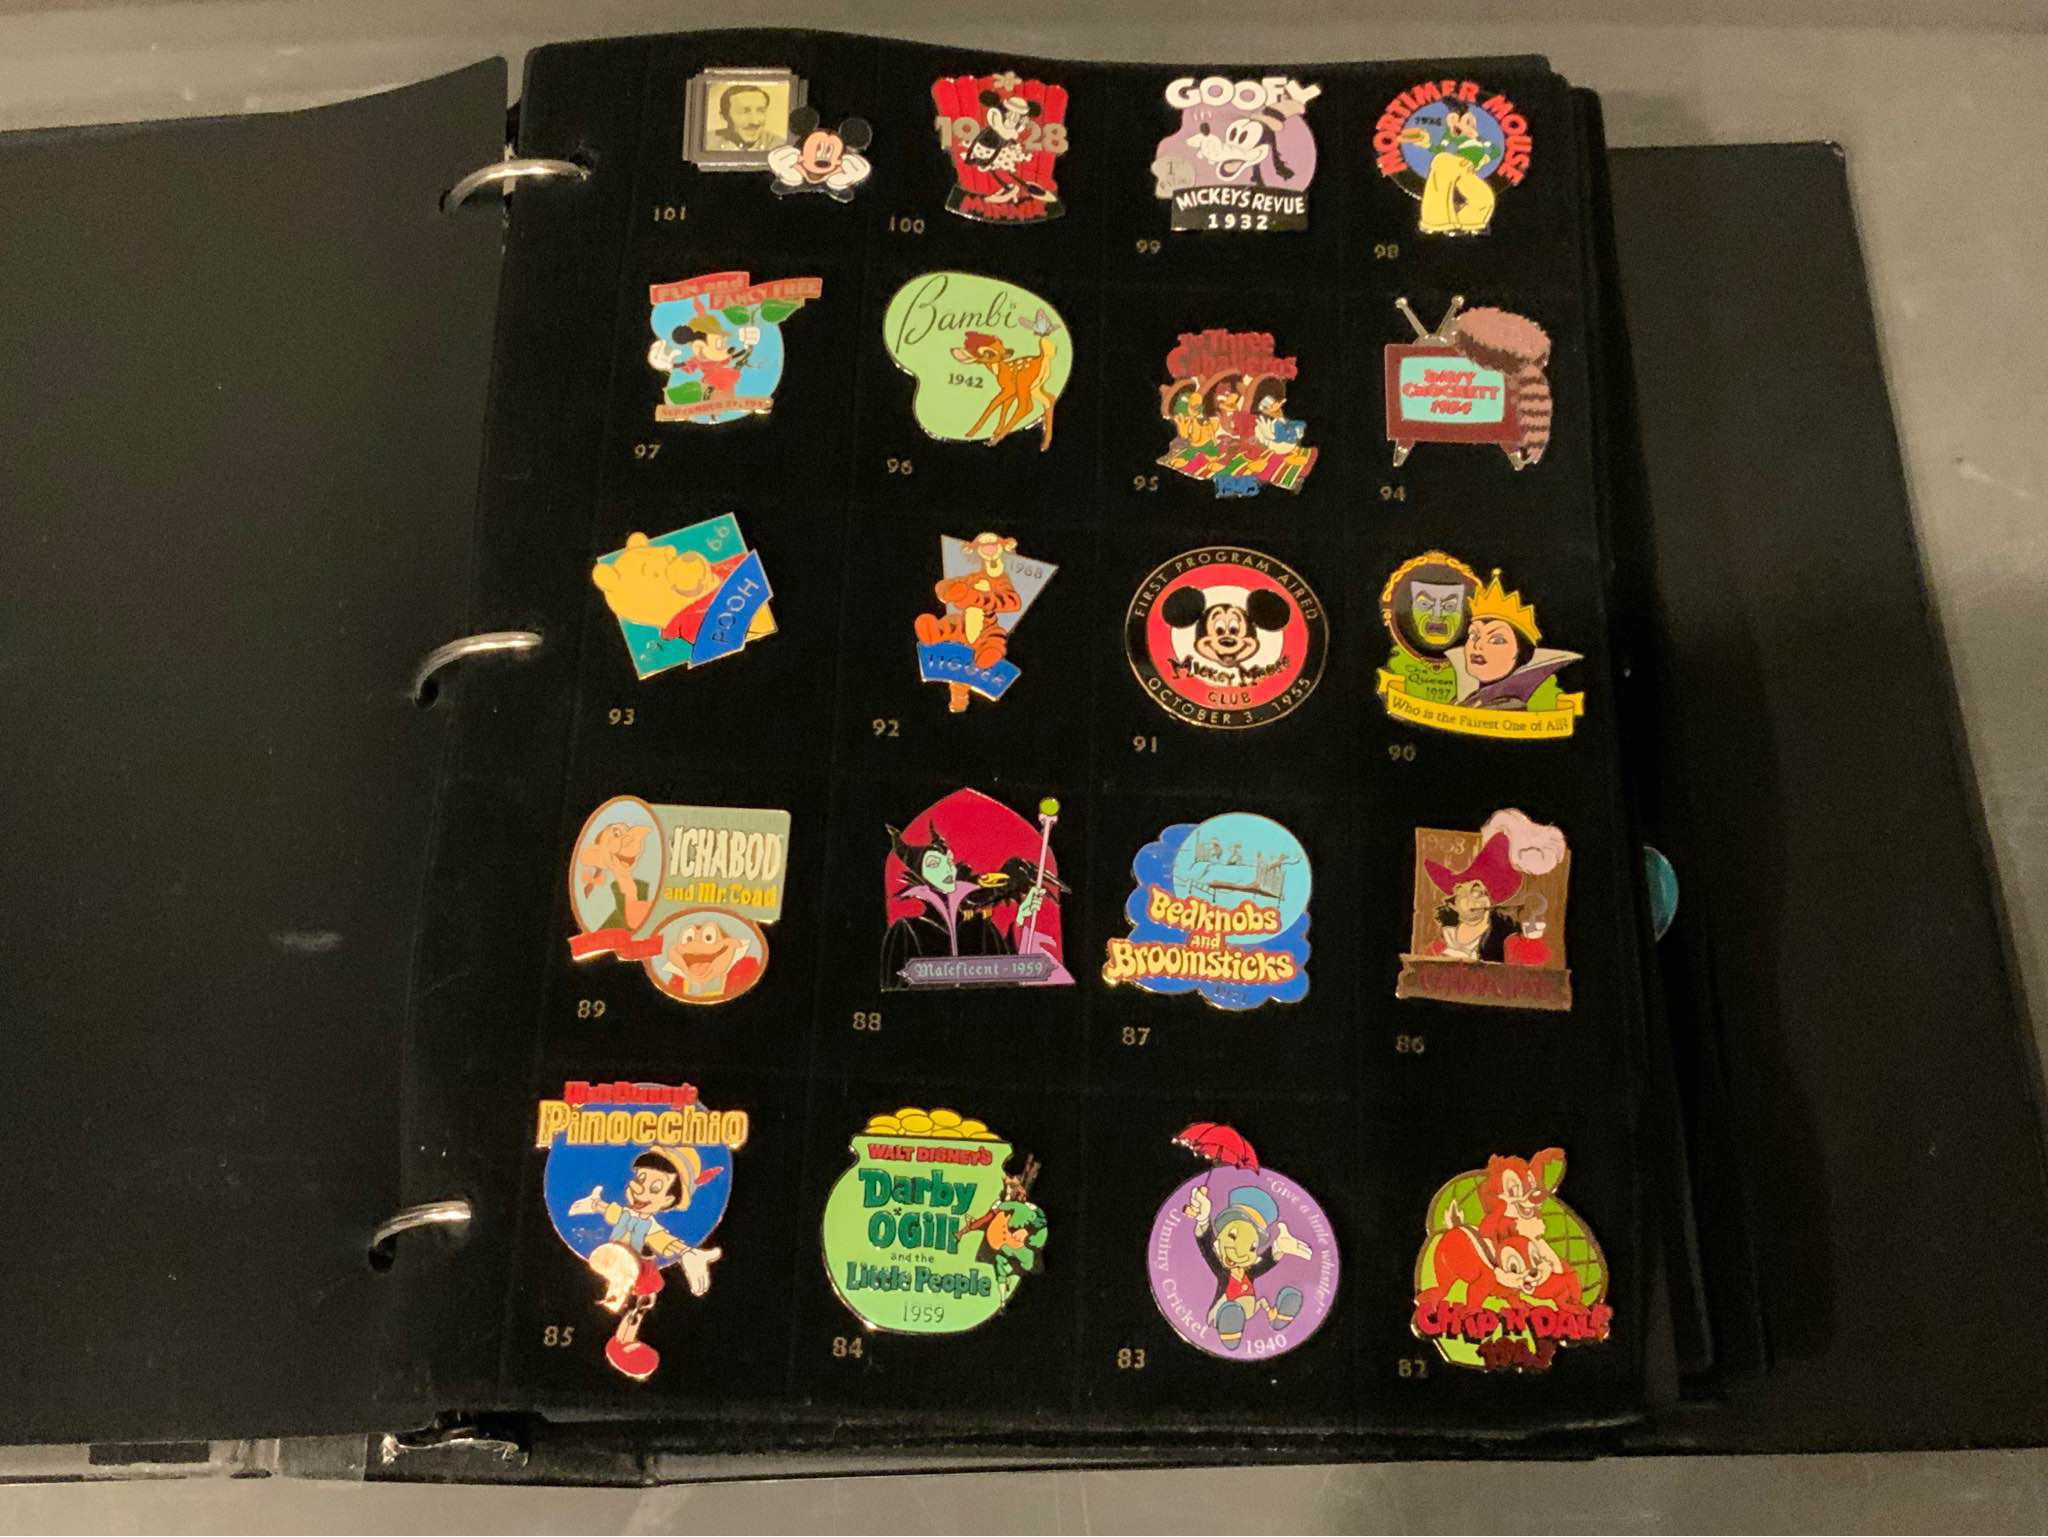 DISNEY COUNTDOWN TO THE MILLENNIUM PINS  COMPLETE 102 PIN SET W/ CARDS BINDER